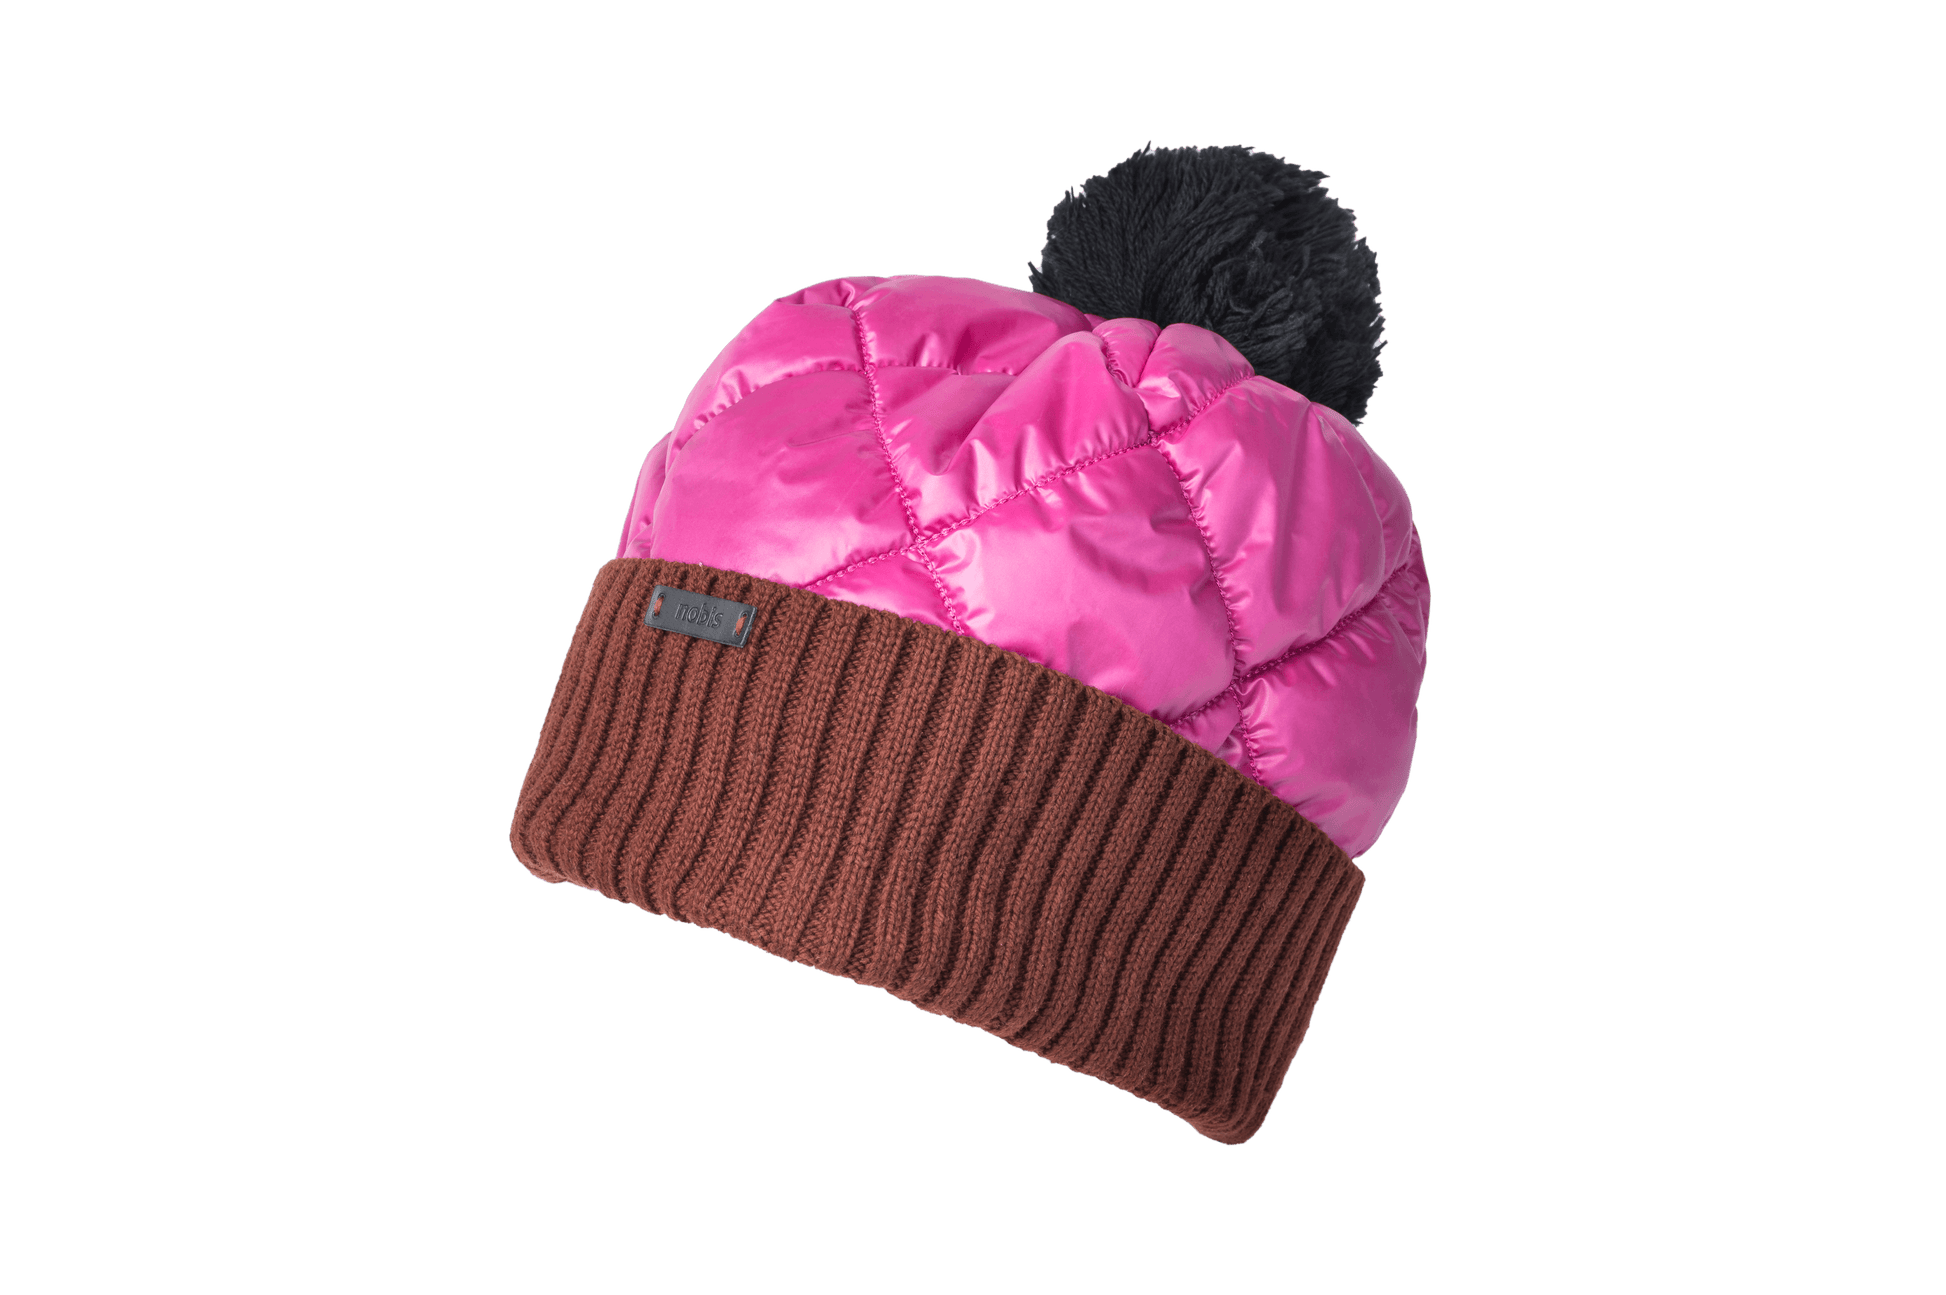 Lany Unisex Hybrid Pom Beanie in an extra fine merino wool blend and premium cire technical taffeta fabrication, rib knit cuff with leather Nobis wordmark detailing, quilted body, and plush pom-pom finish, in Festival Fuschia